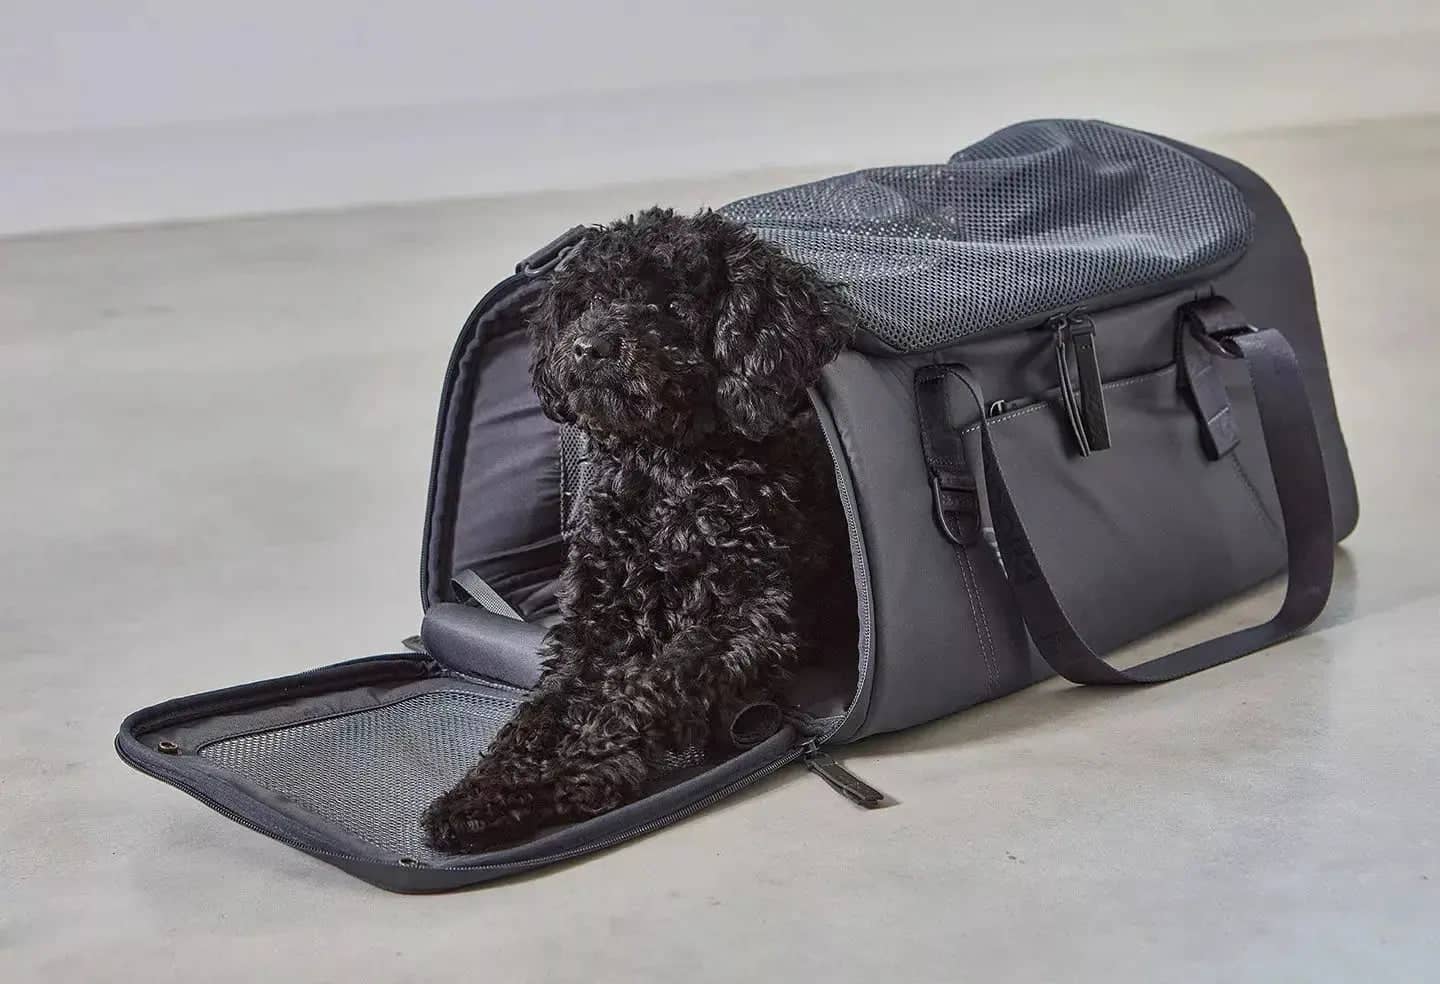 Comfortable and secure dog travel carrier with mesh ventilation